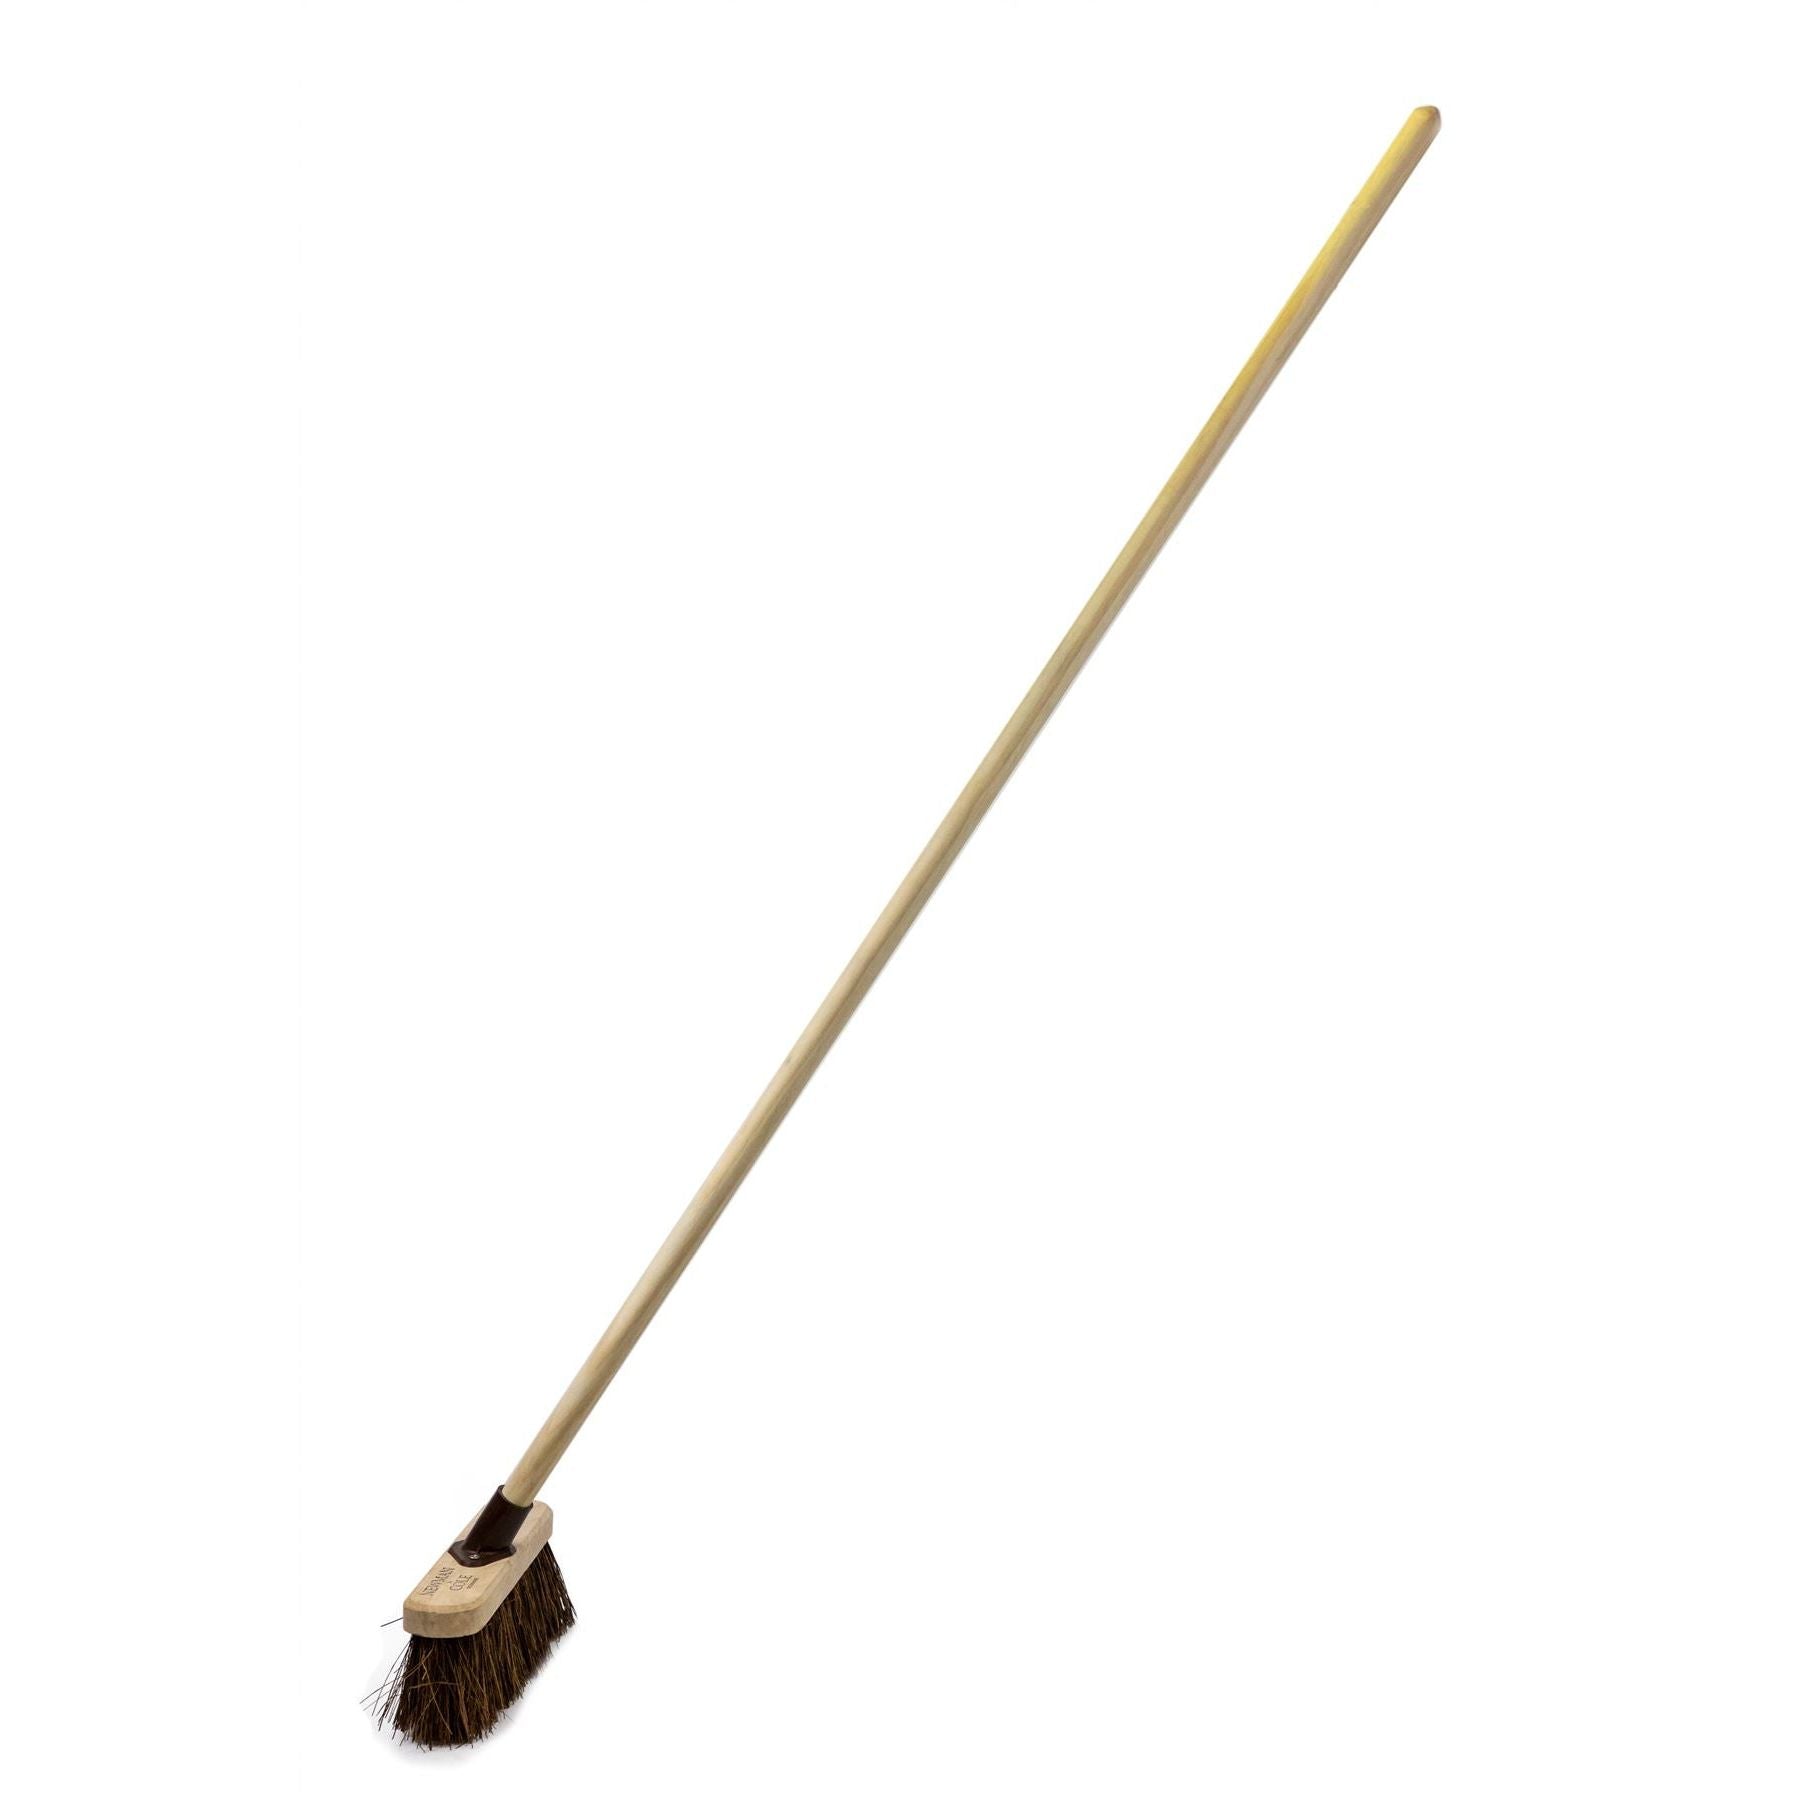 Newman and Cole 10" Natural Bassine Broom Head with Plastic Socket Supplied with Handle